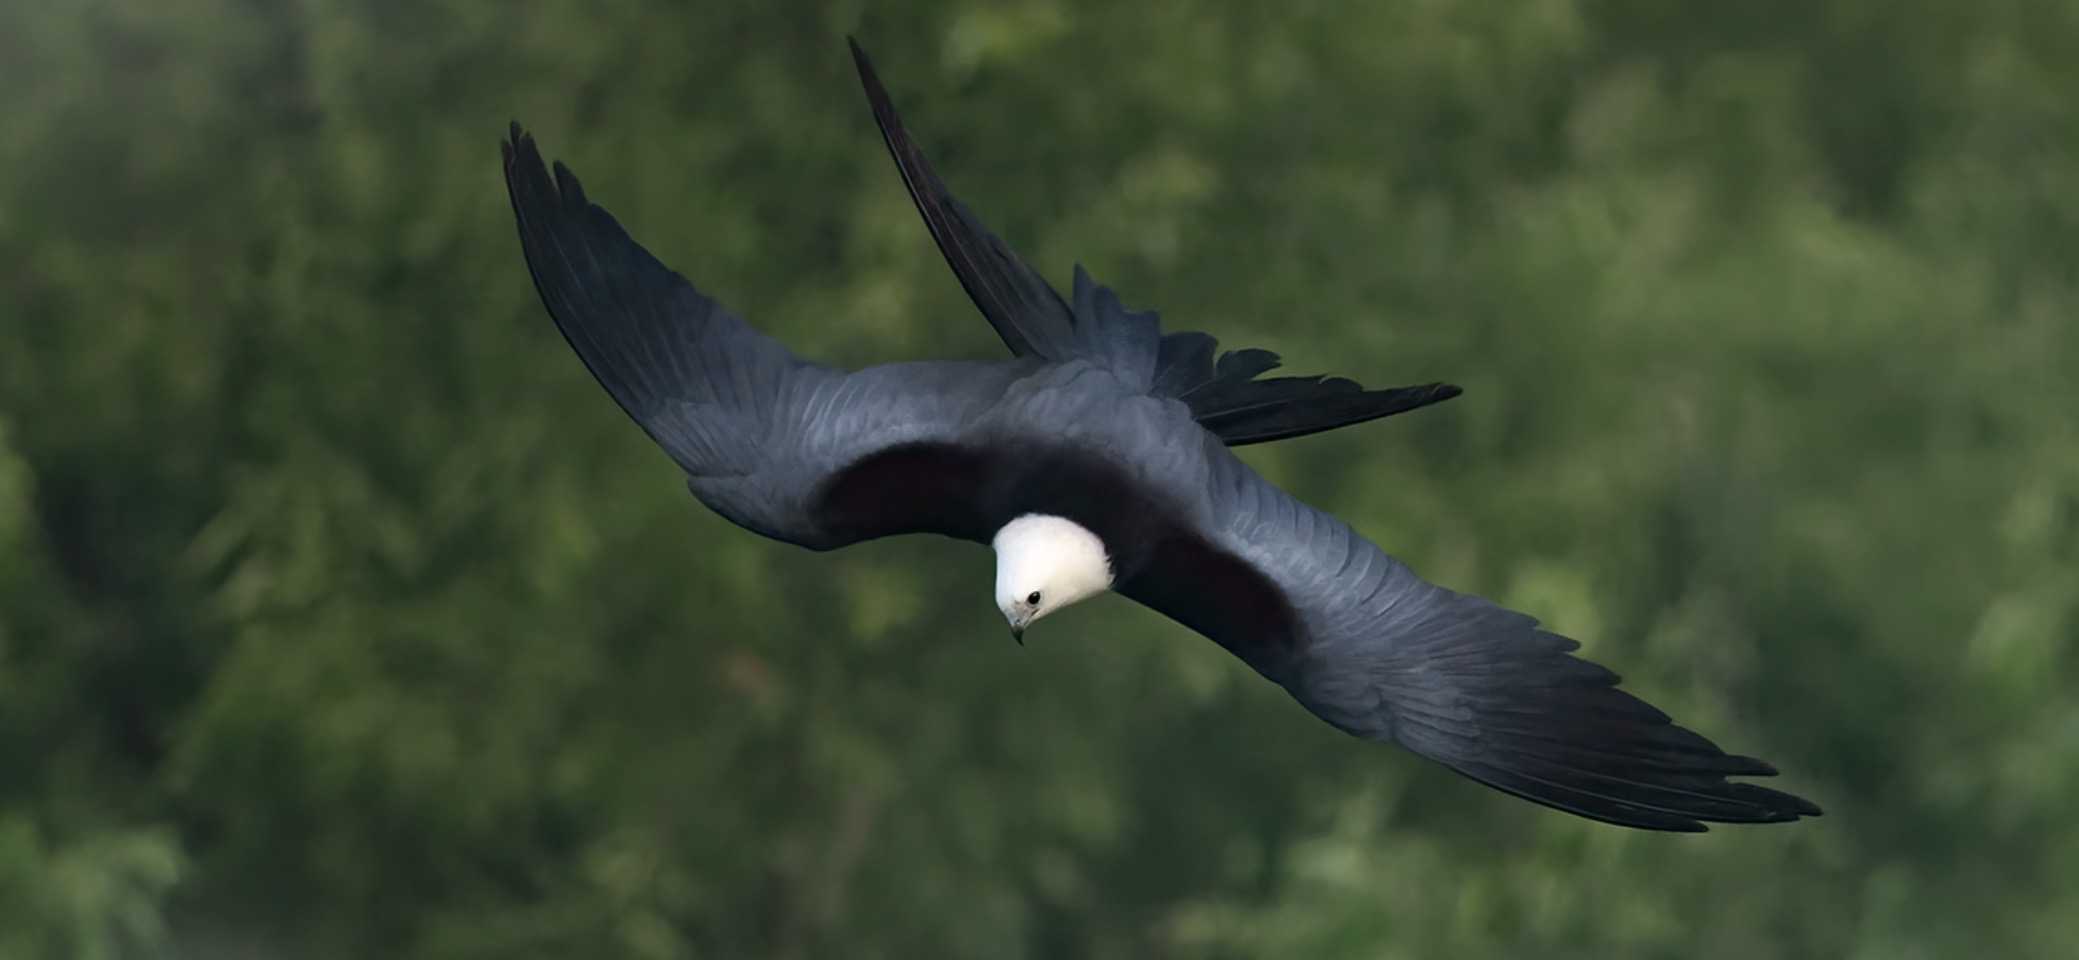 Aerial view of a large black bird soaring over treetops